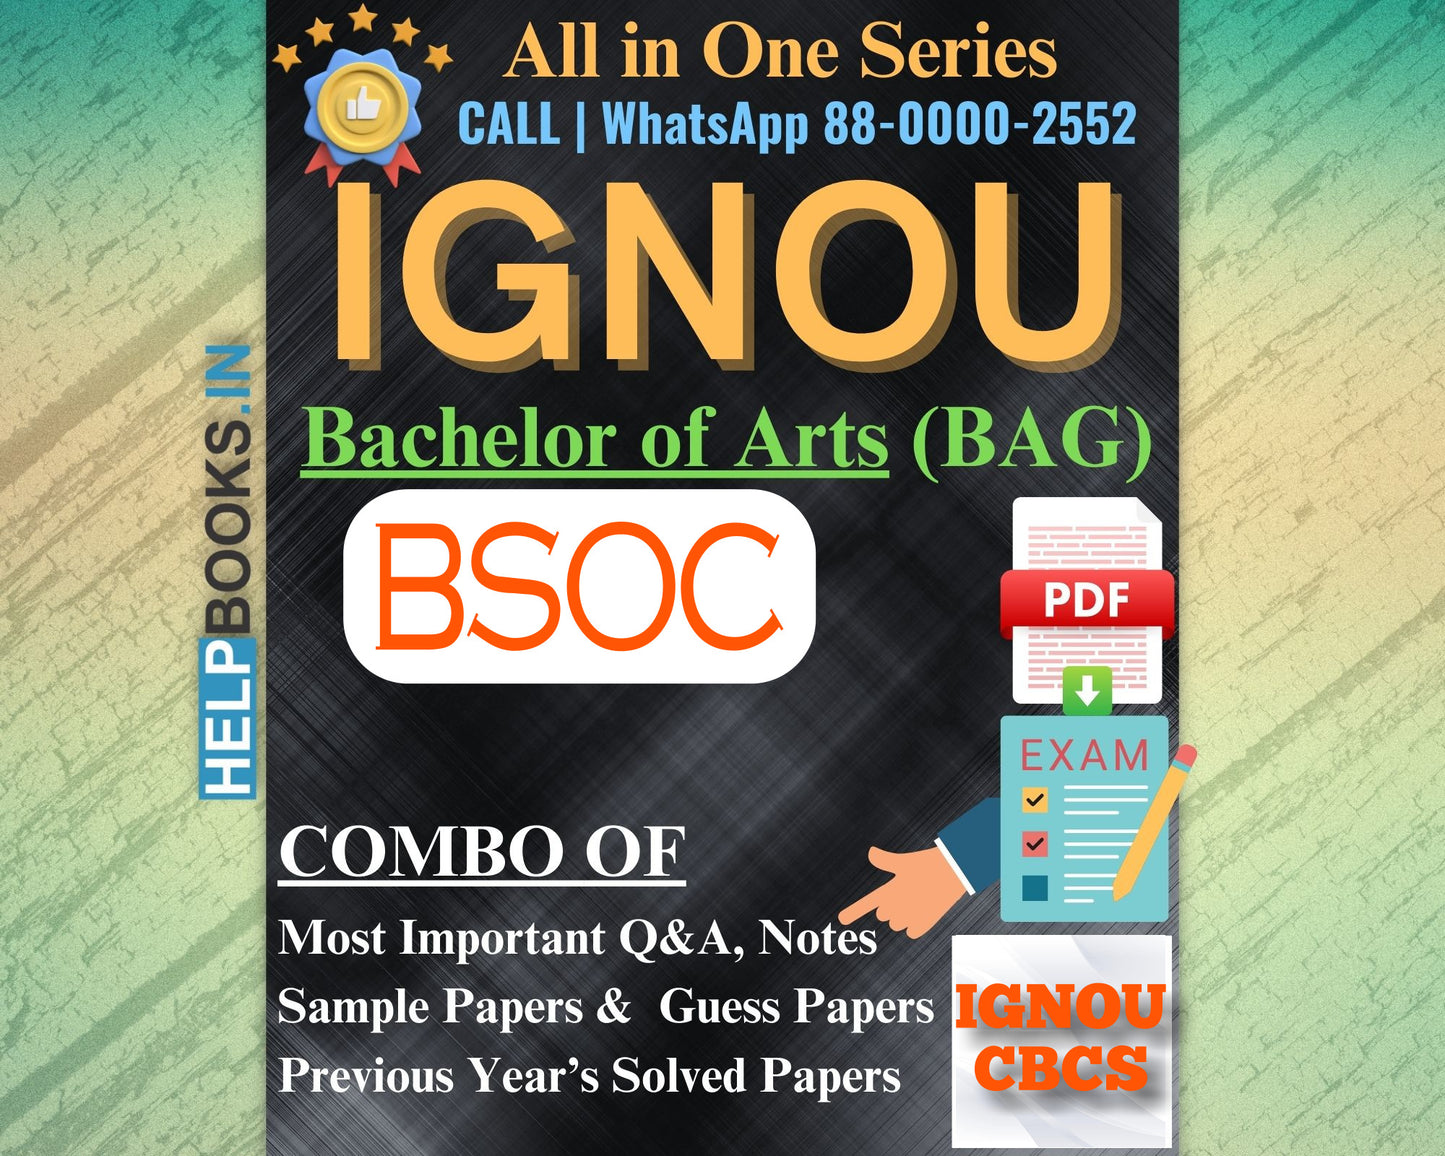 IGNOU BAG Online Study Package: Bachelor of Arts (BA) - Previous Years Solved Papers, Q&A, Exam Notes, Sample Papers, Guess Papers-BSOC131, BSOC132, BSOC133, BSOC134